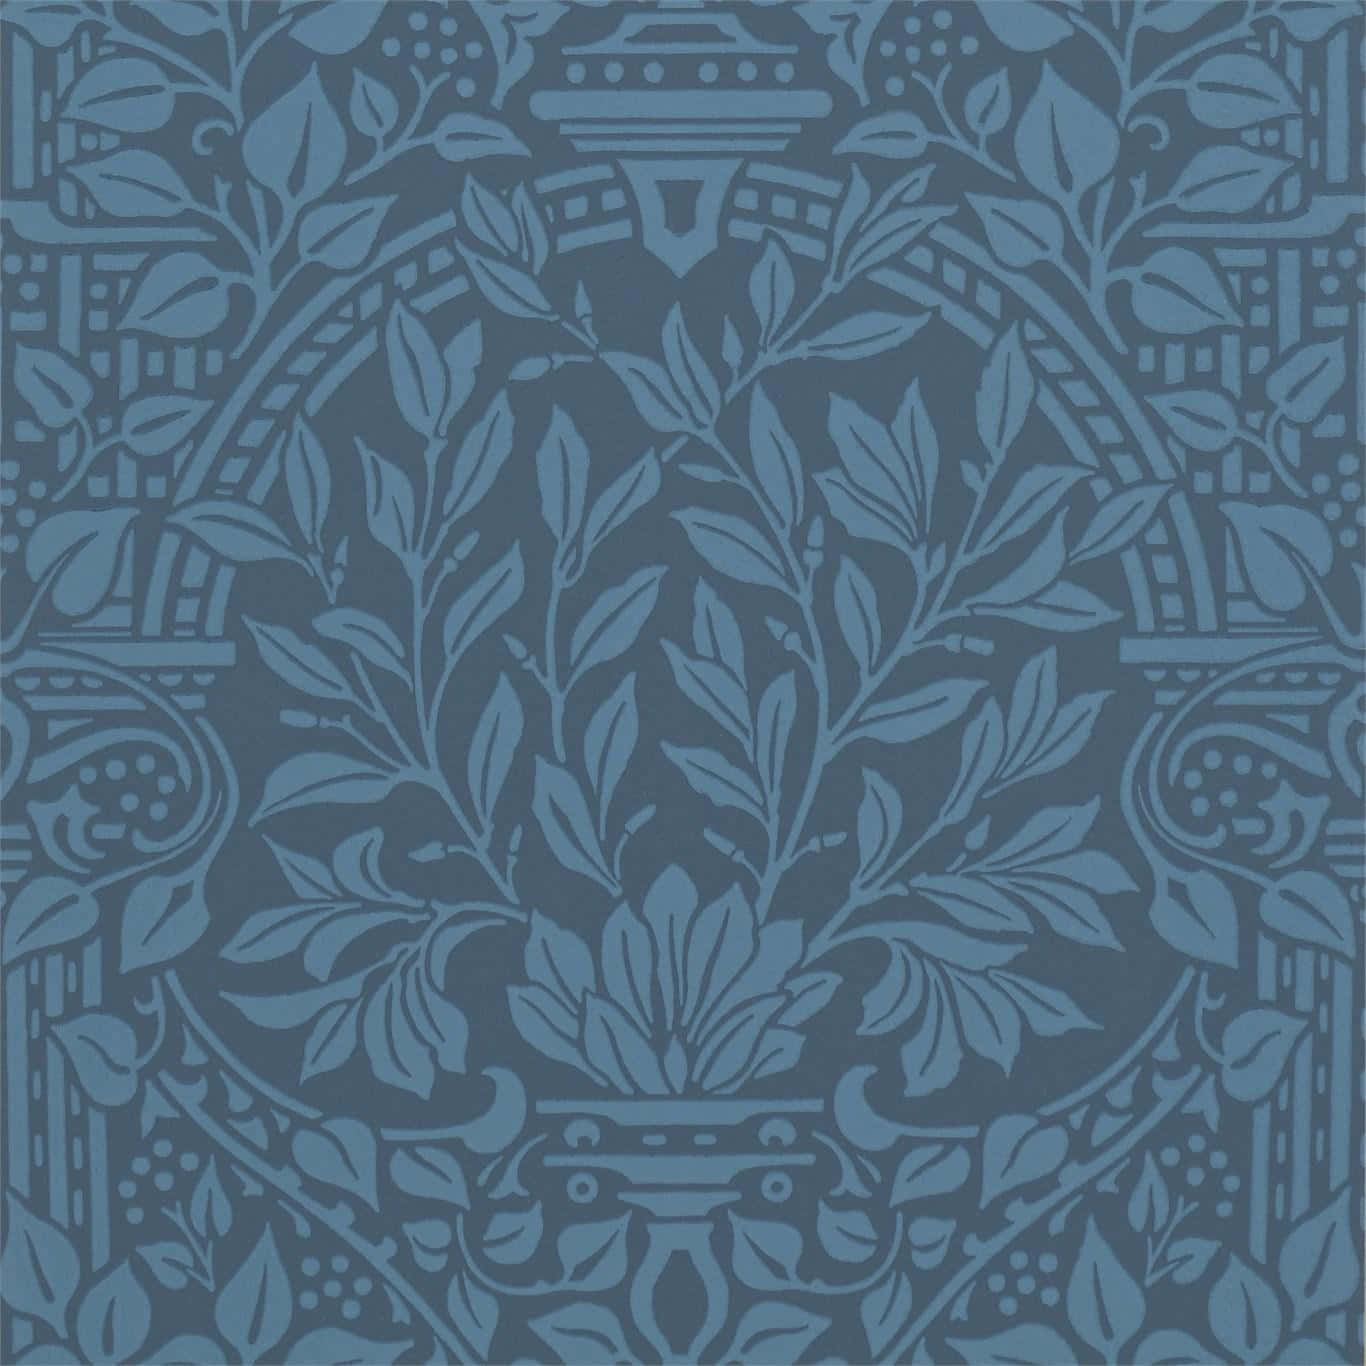 A Blue Wallpaper With An Ornate Design